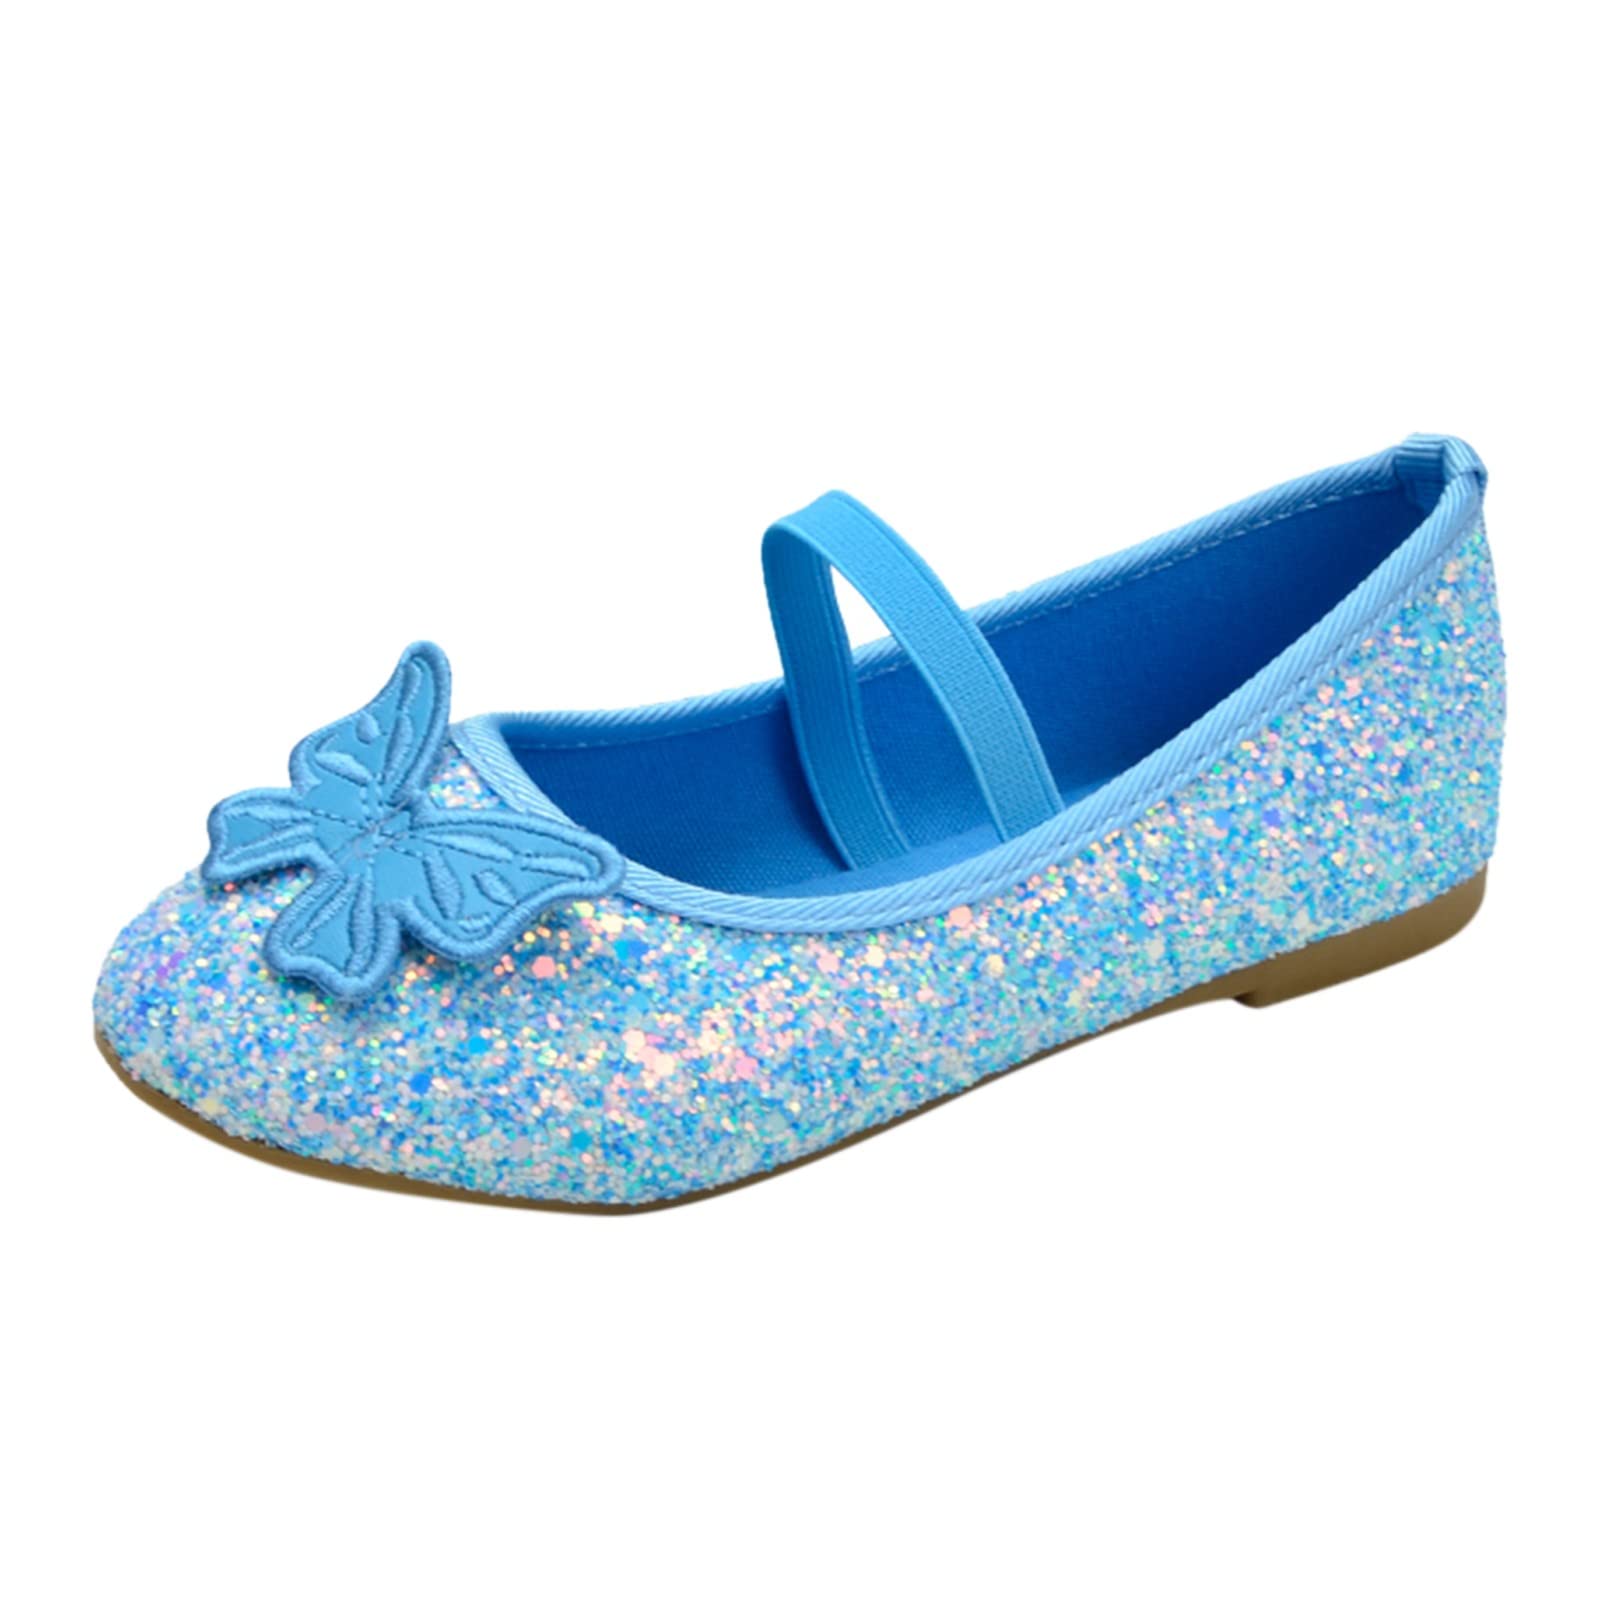 TODOZO Children Shoes Flat Shoes Crystal Shoes with Sequins Bowknot Girls Dancing Shoes Little Girls Shoes Size 11